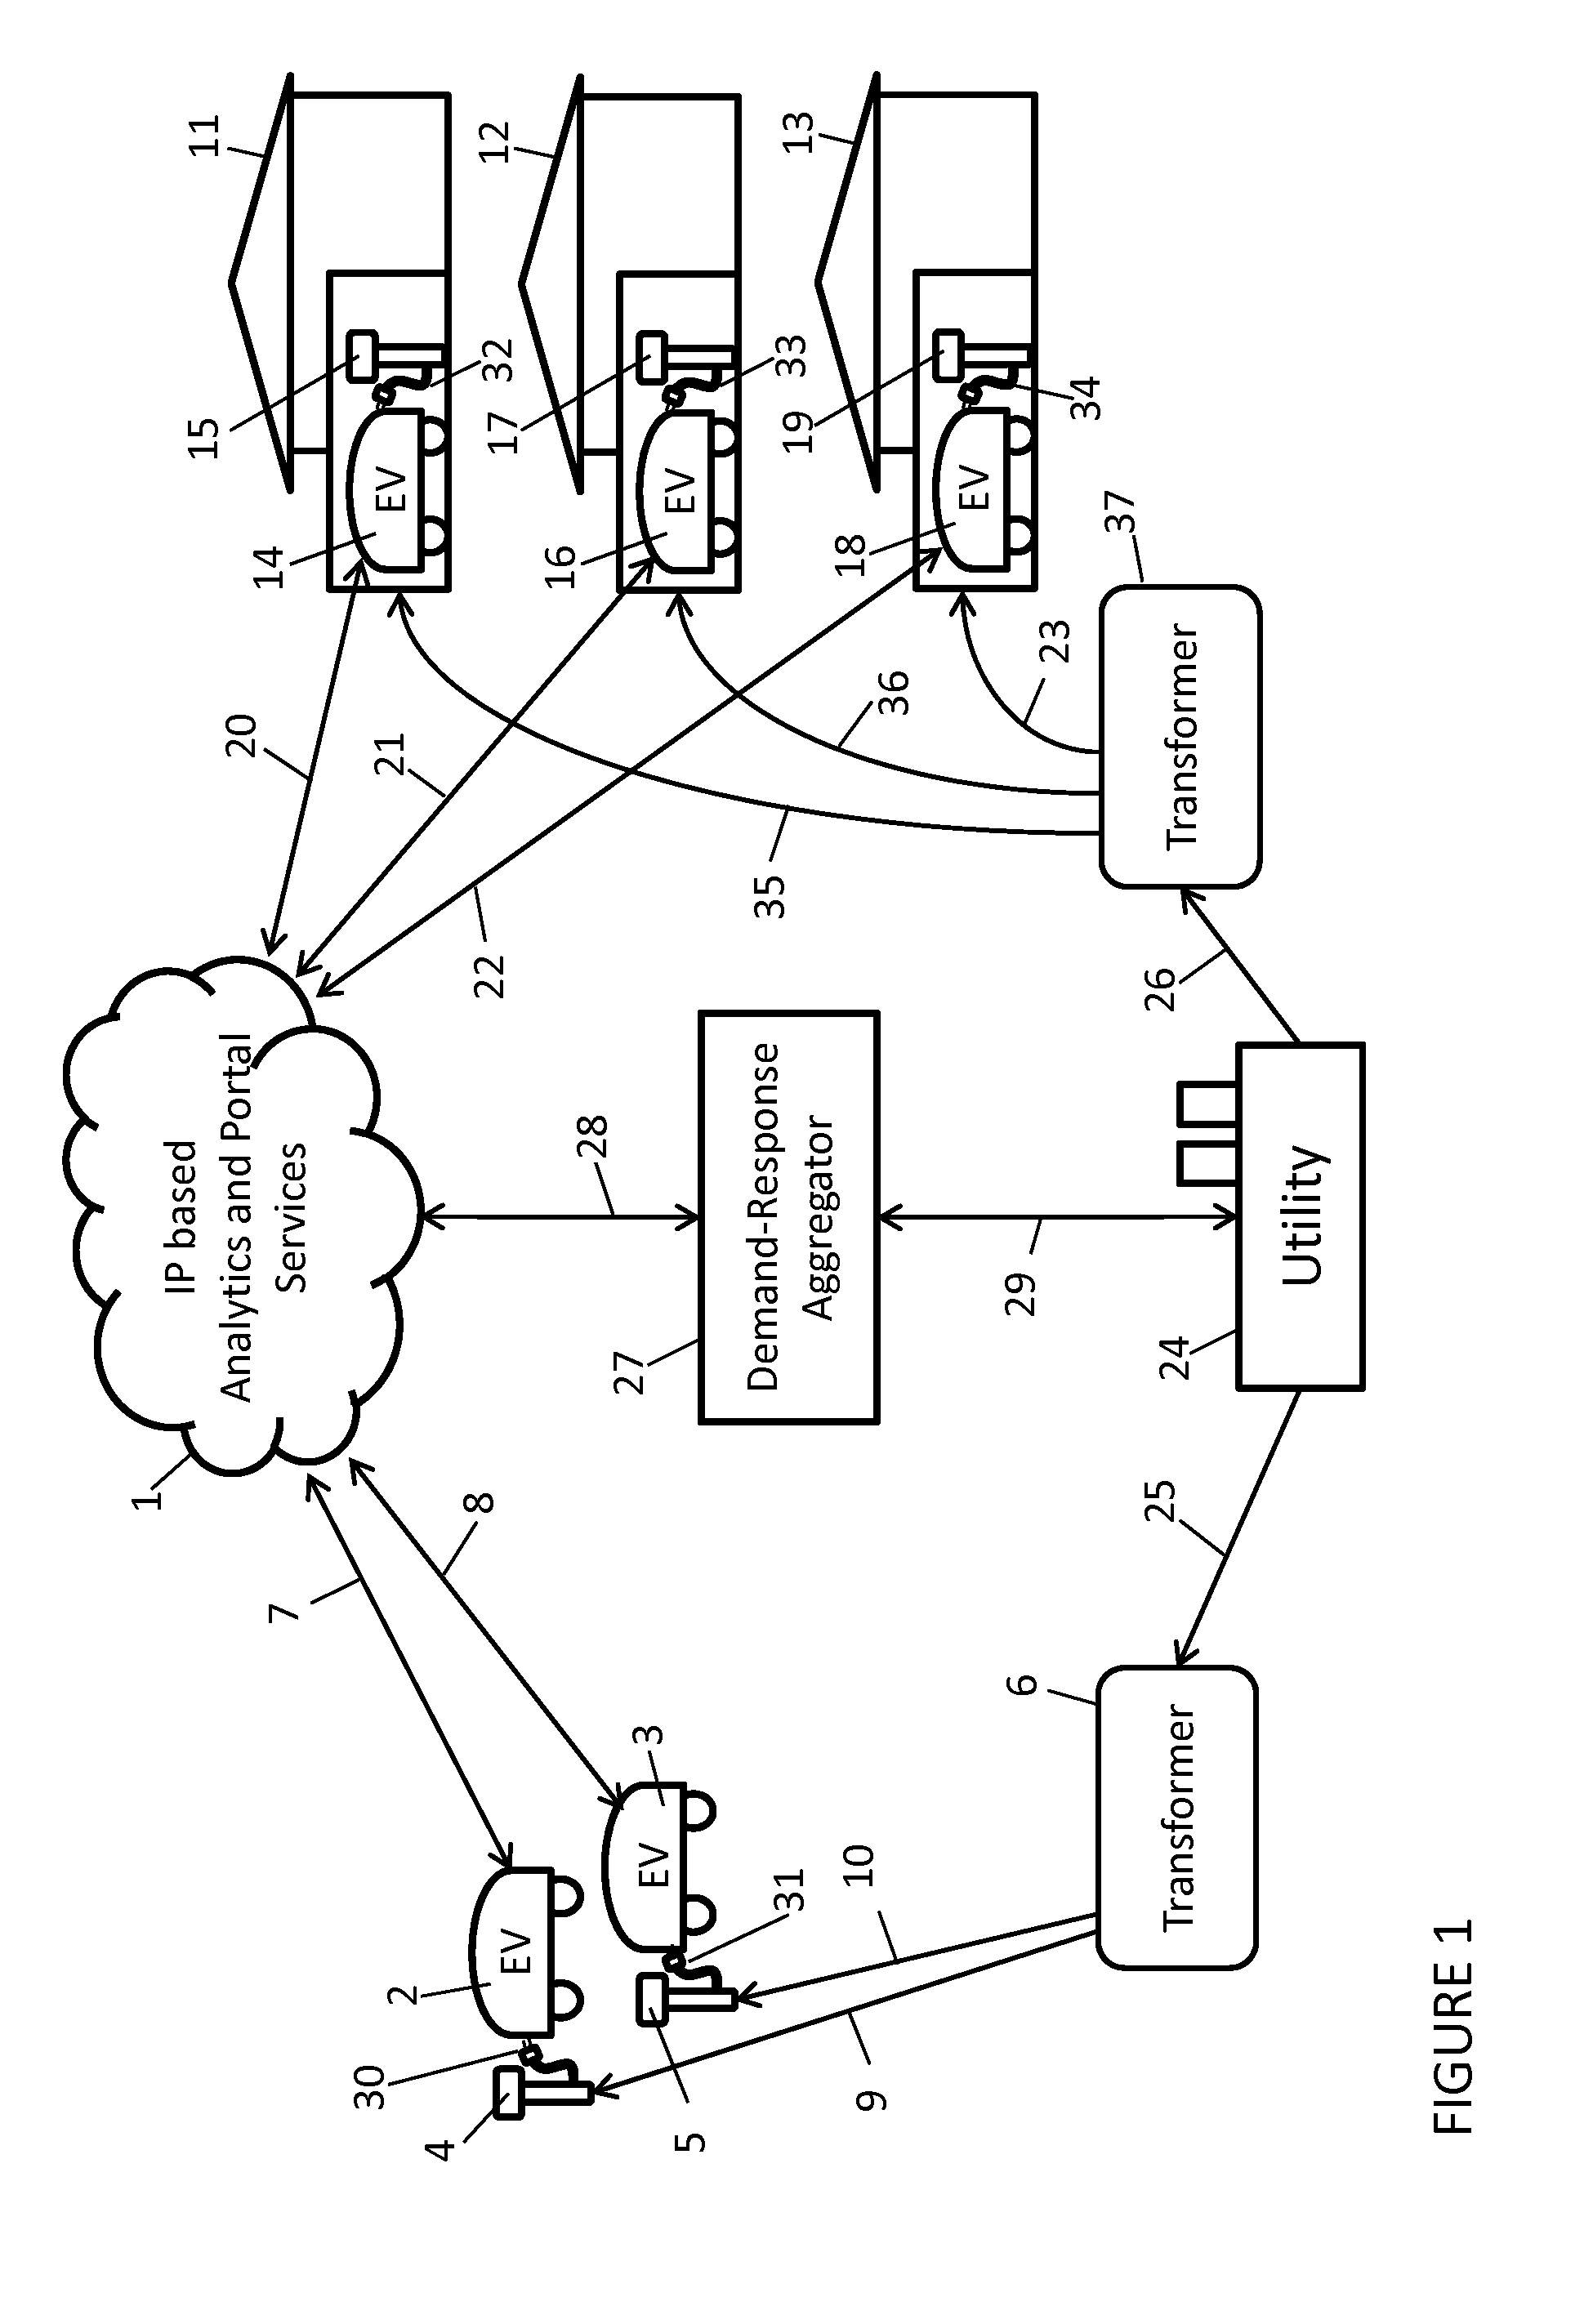 Method and process for acquiring and delivering electric vehicle owner-operator preference data which is used to schedule and regulate the charging of multiple electric vehicle batteries within a shared local power distribution network